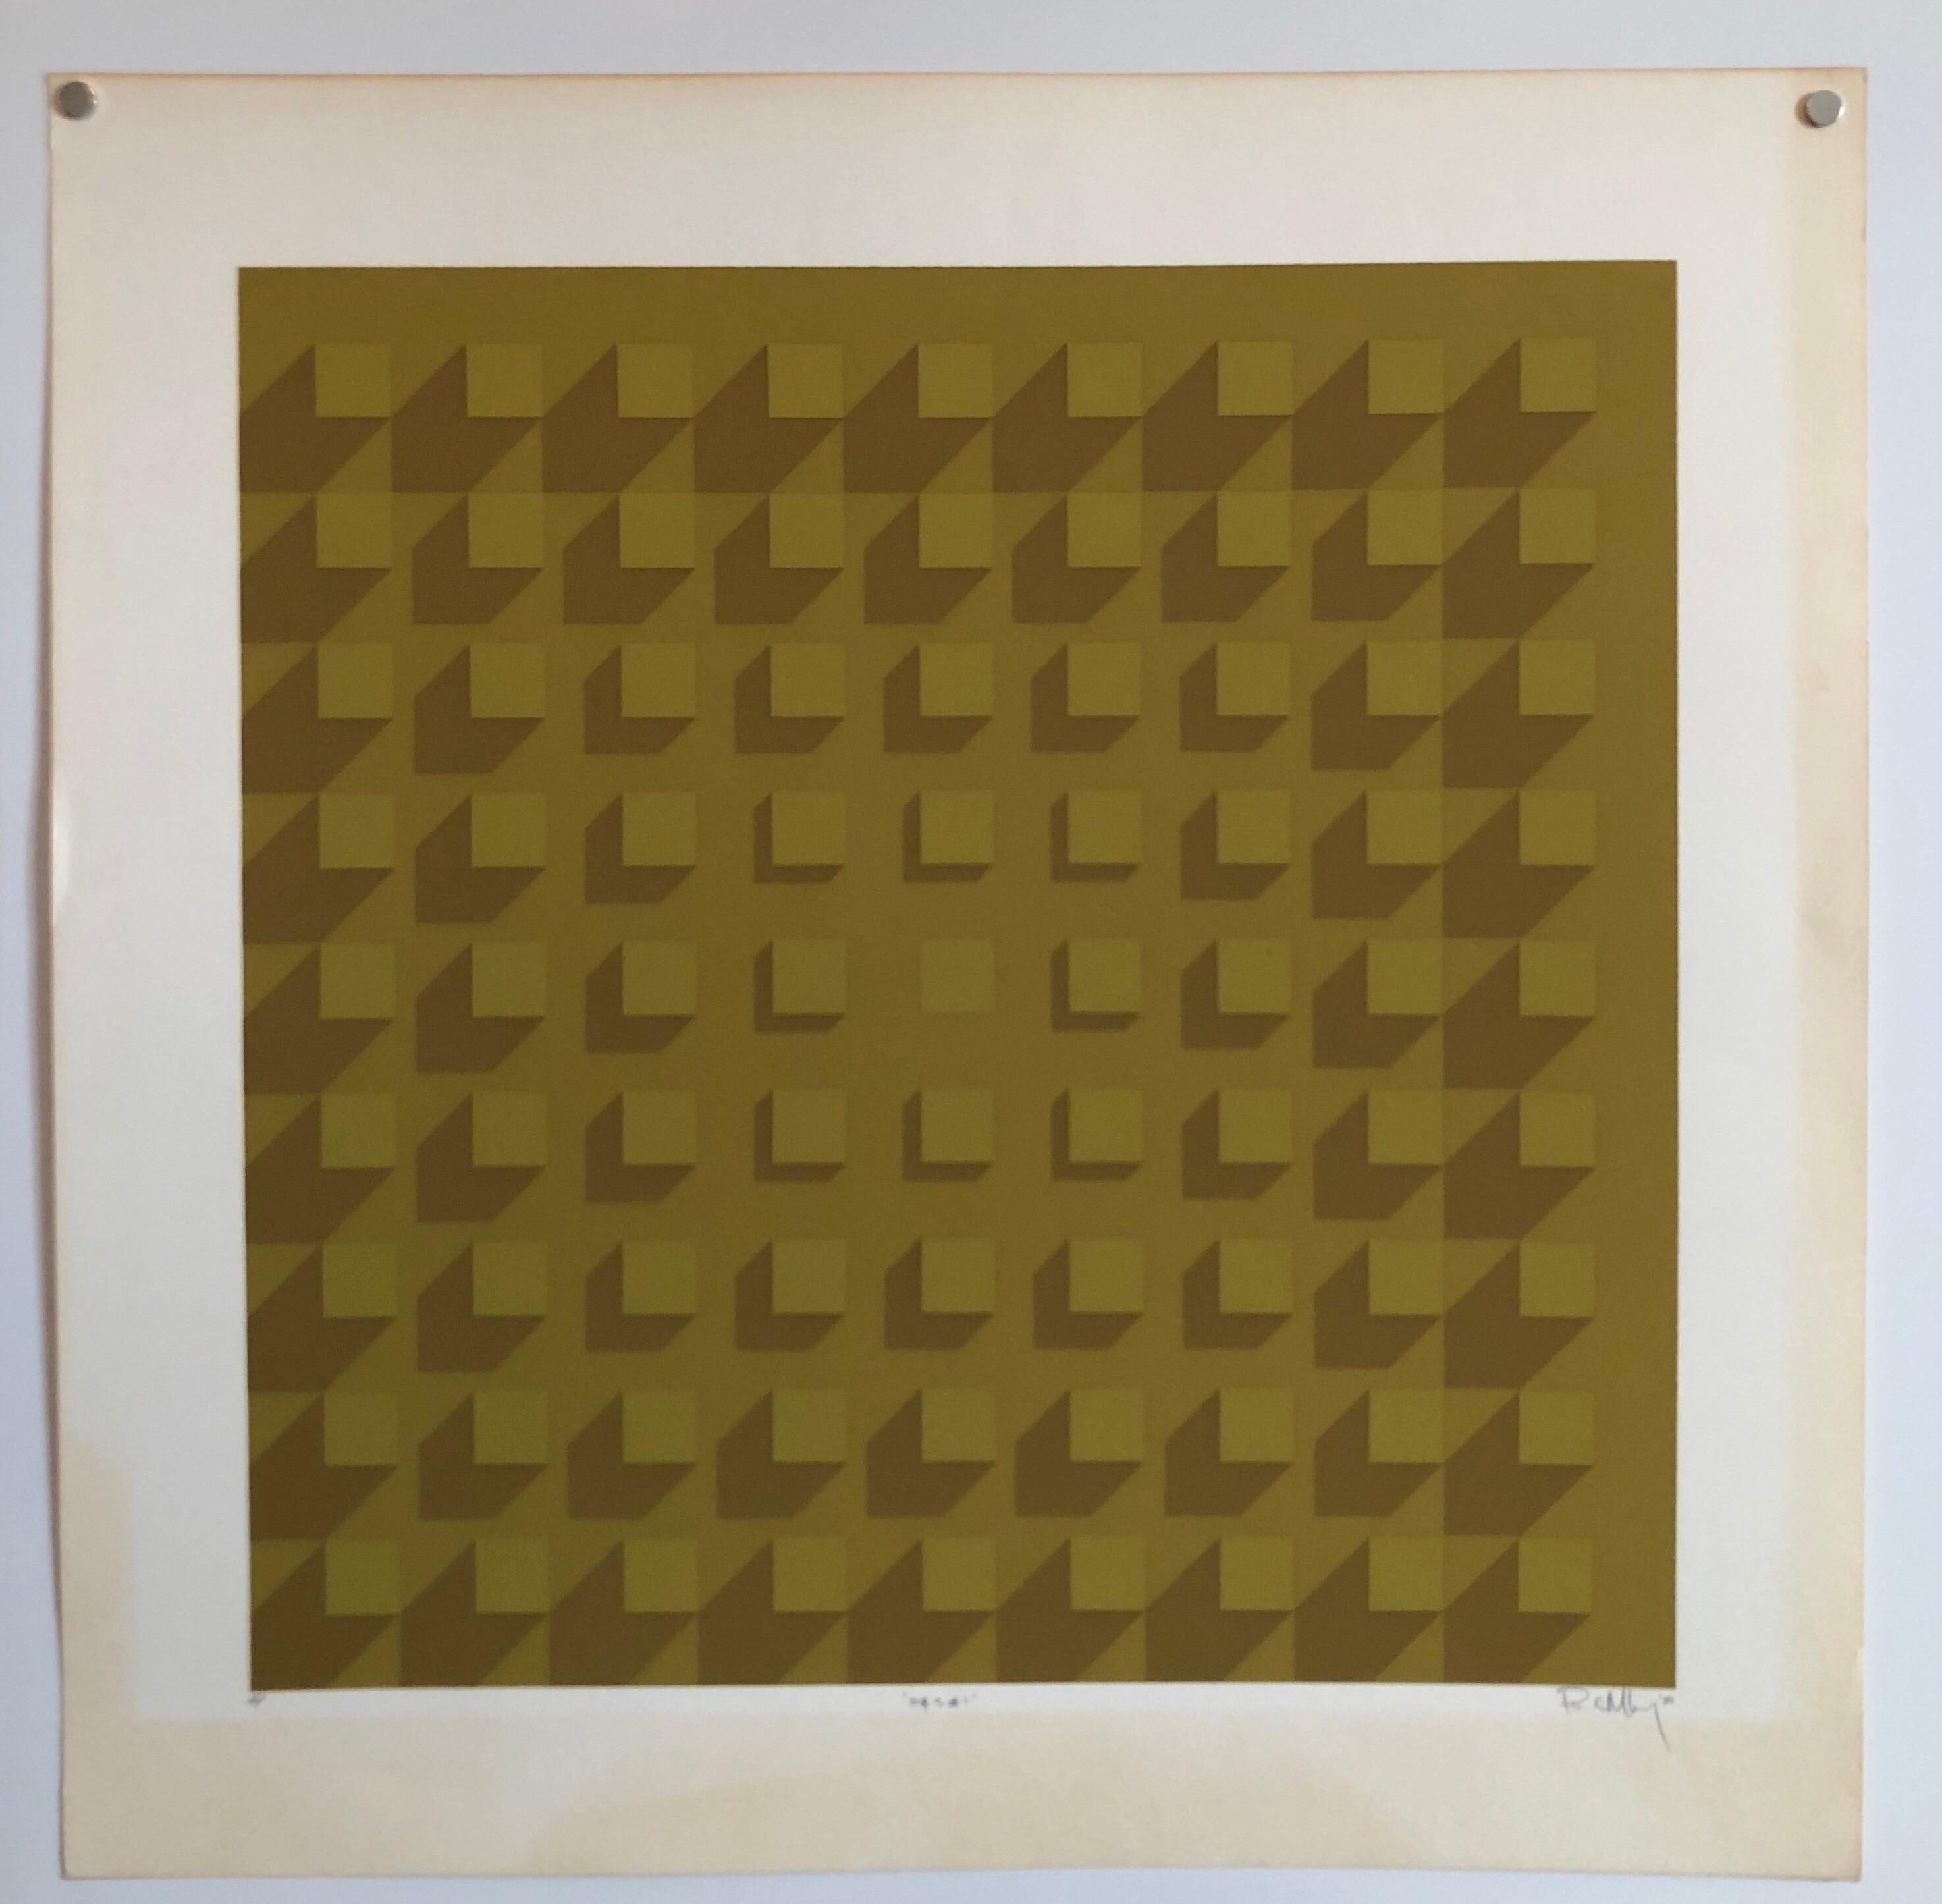 Abstract Geometric 1970s Vintage Silkscreen Screen Print Manner of Vasarely 1